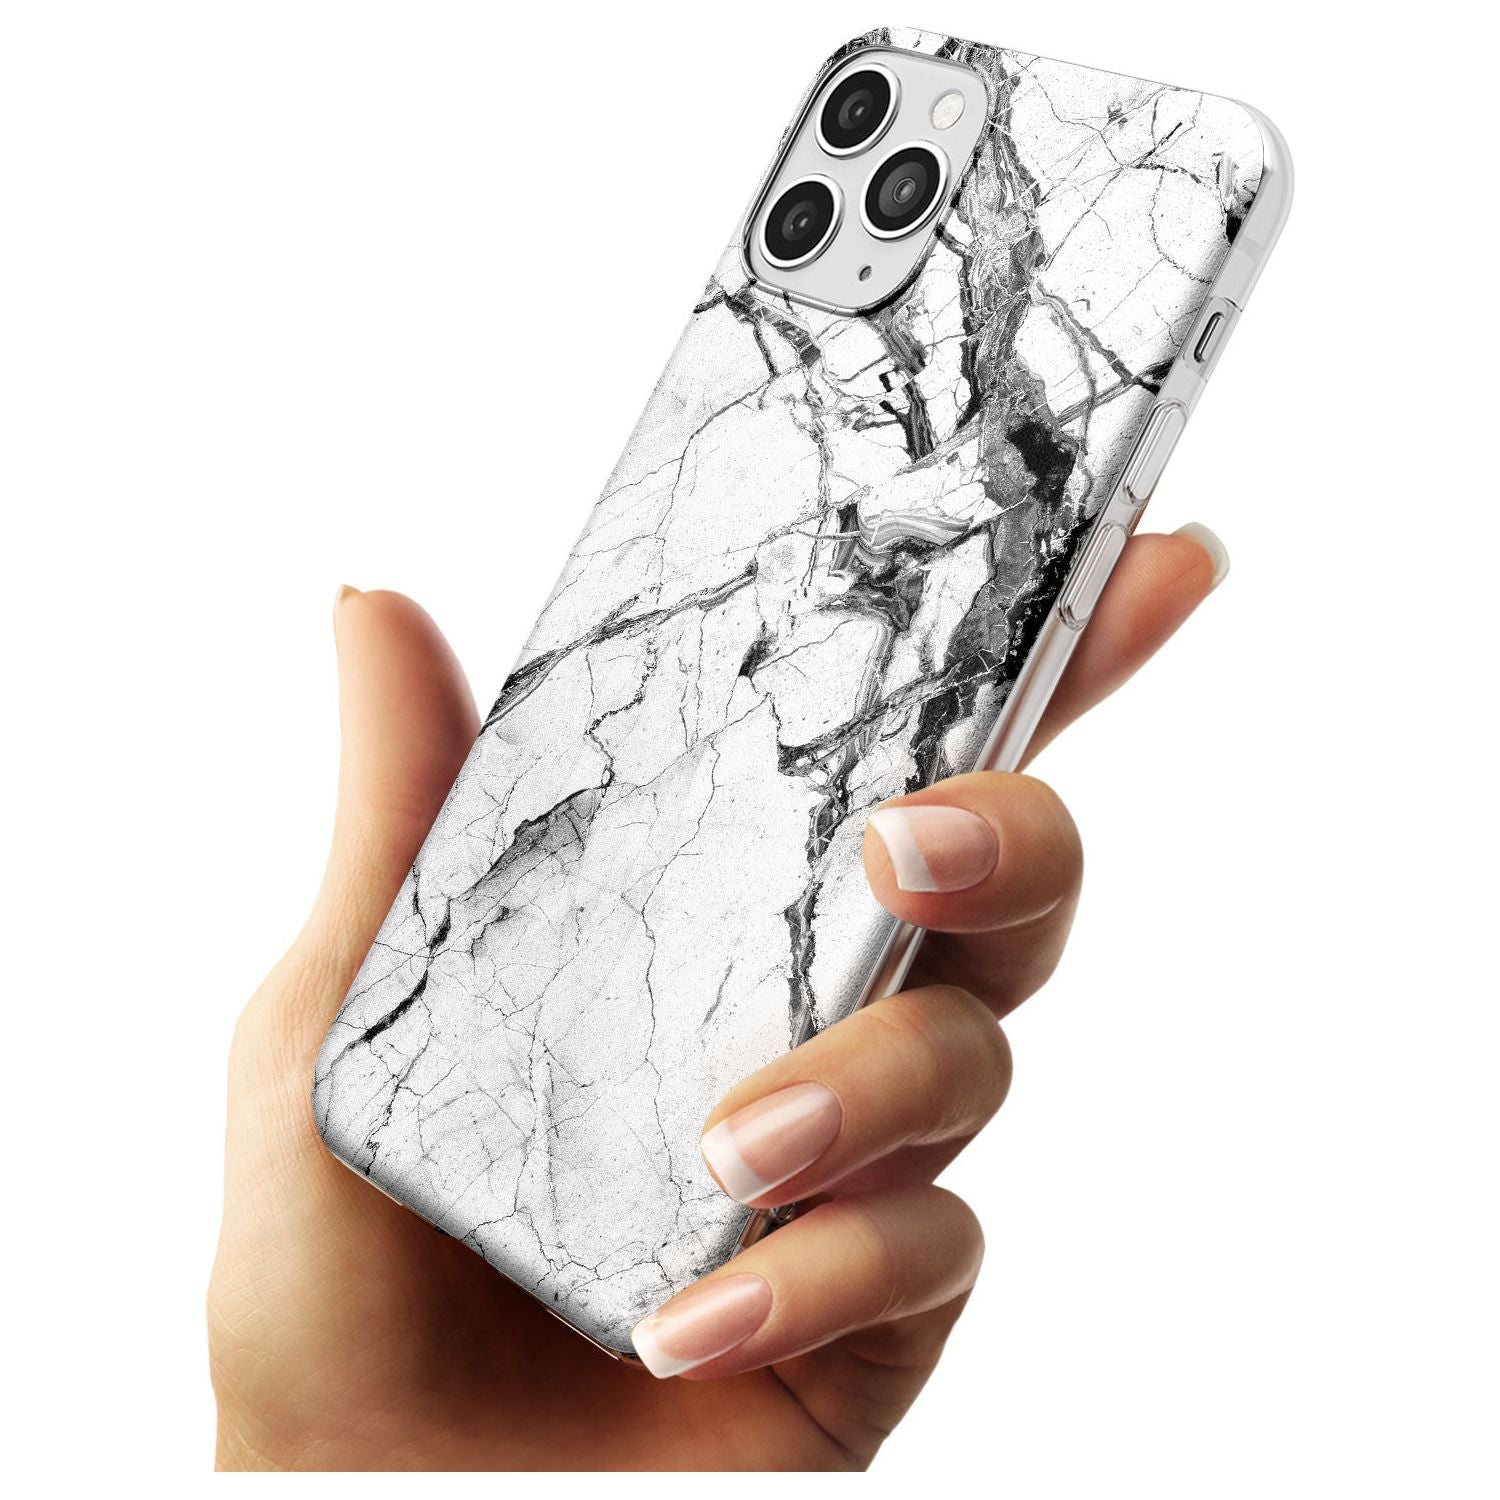 Black & White Stormy Marble Slim TPU Phone Case for iPhone 11 Pro Max